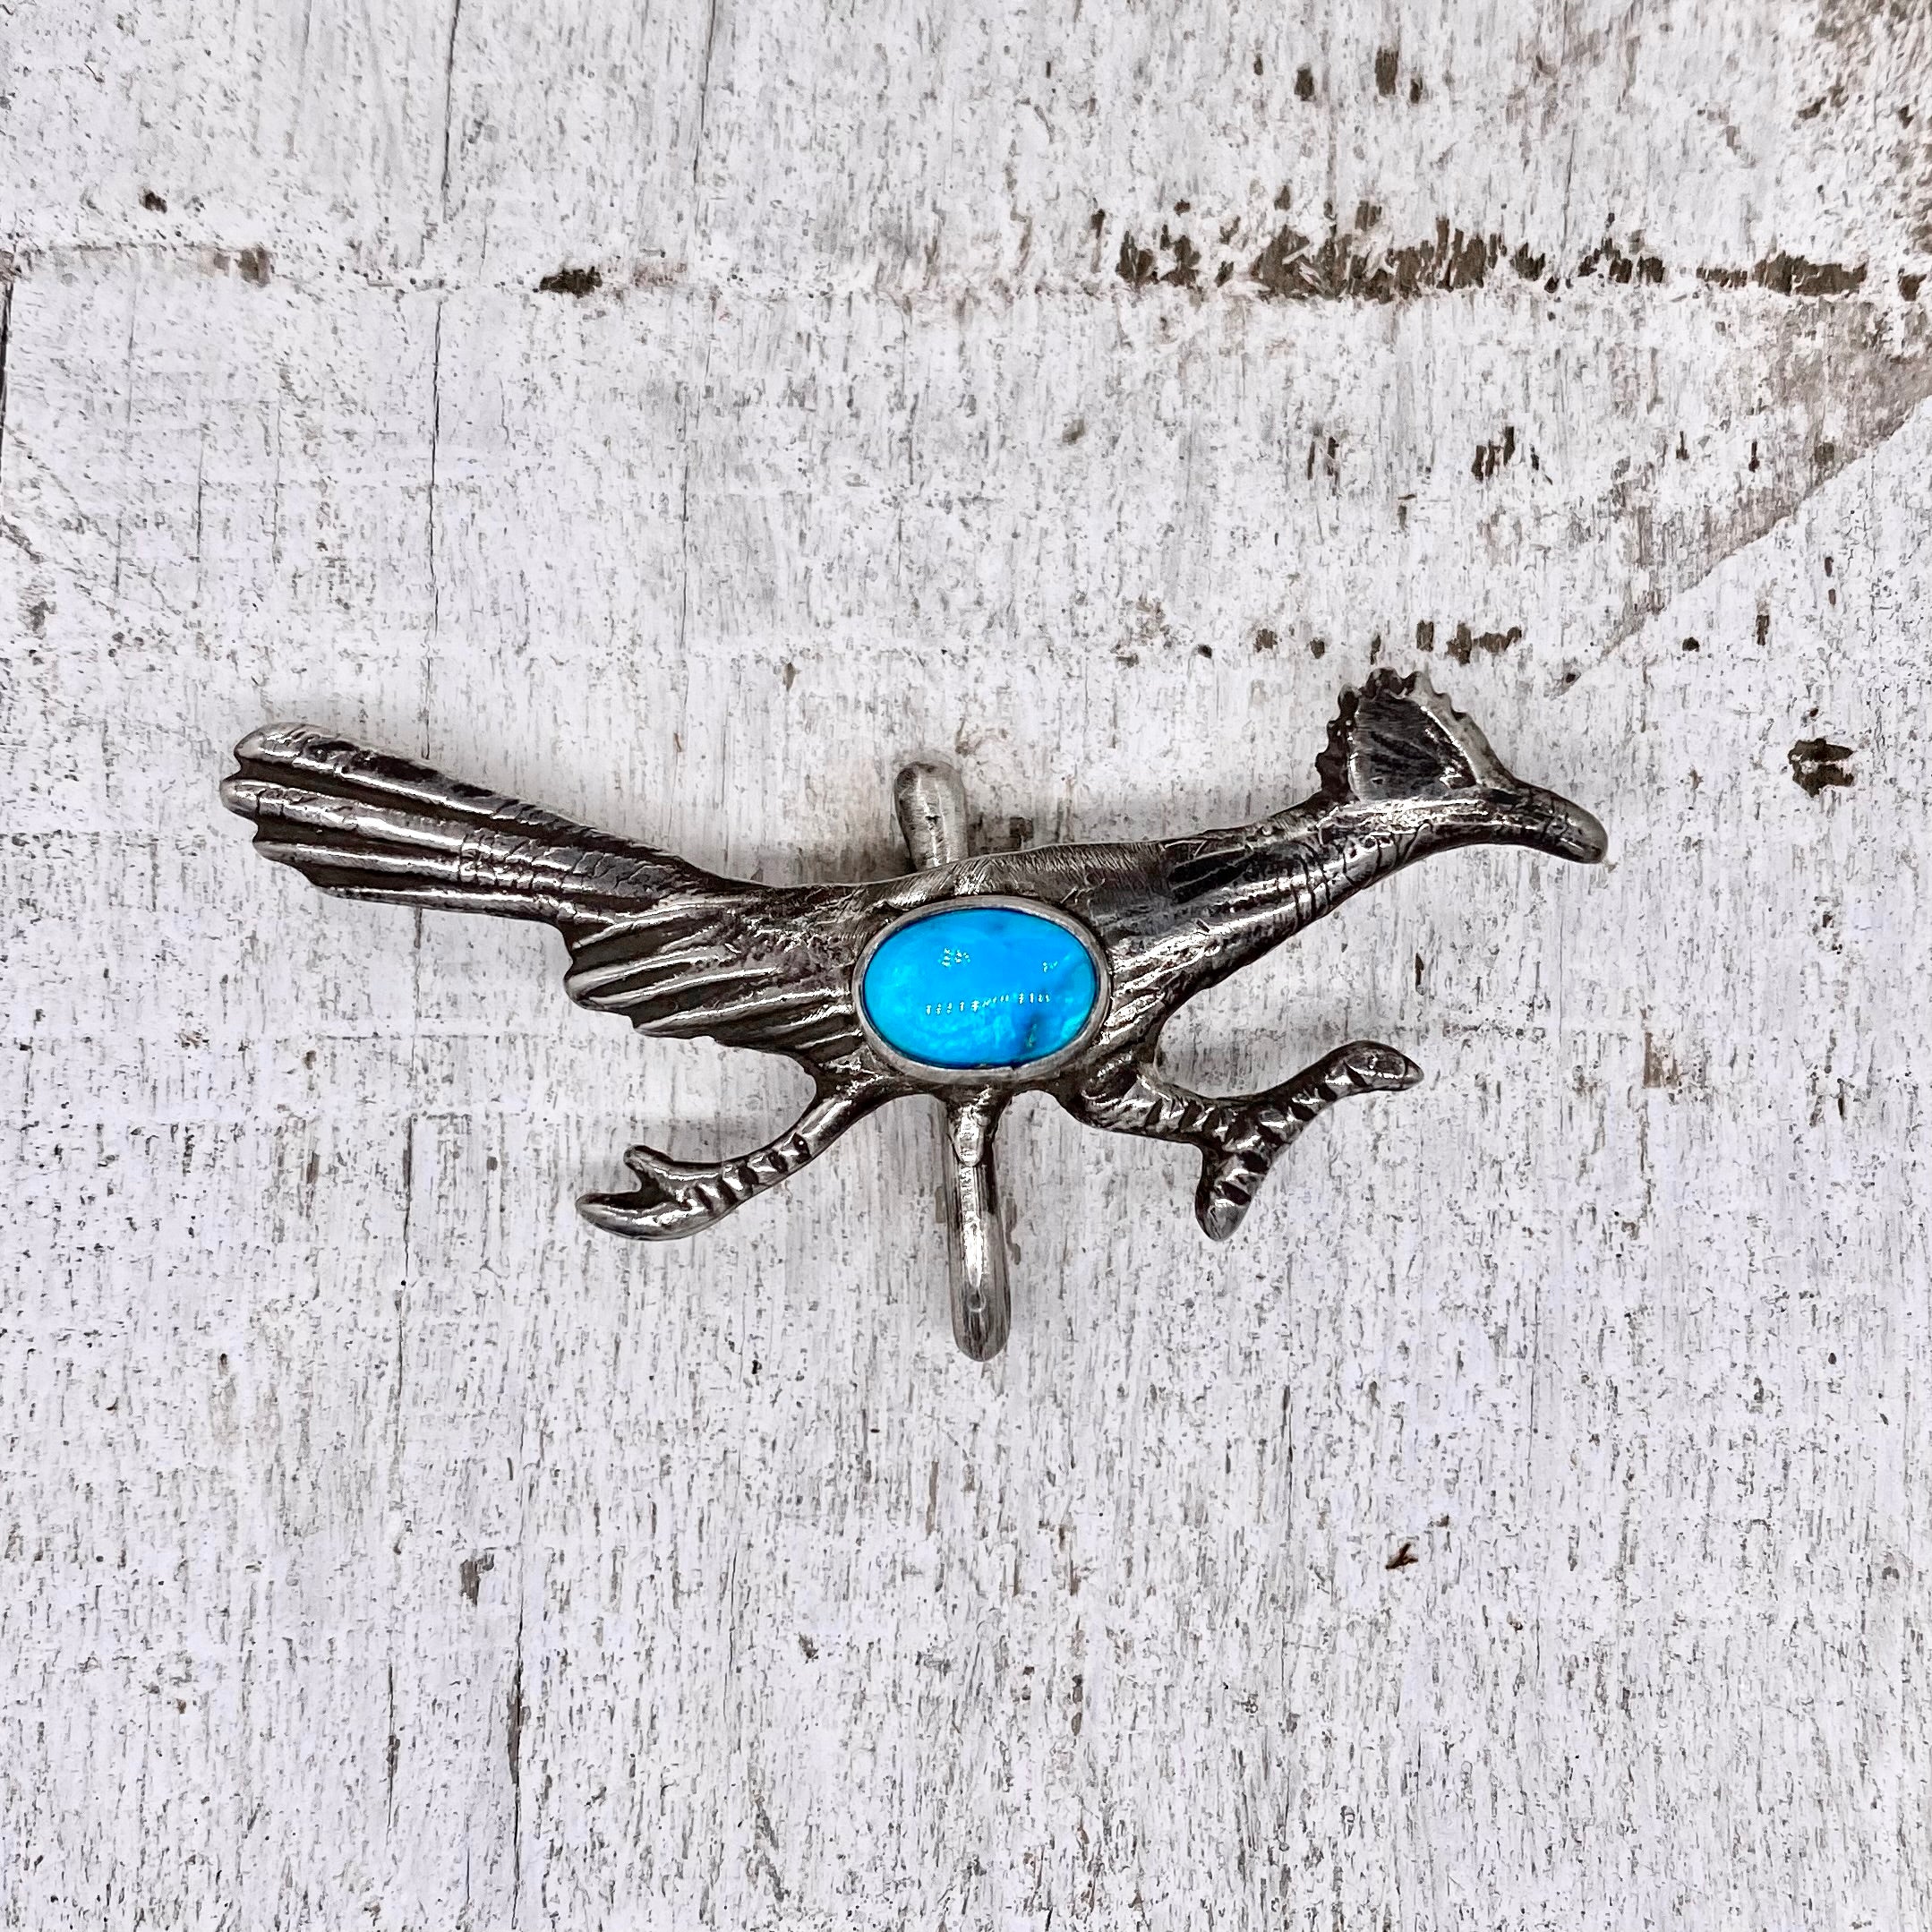 Catch me if you Can - Roadrunner Hat Token